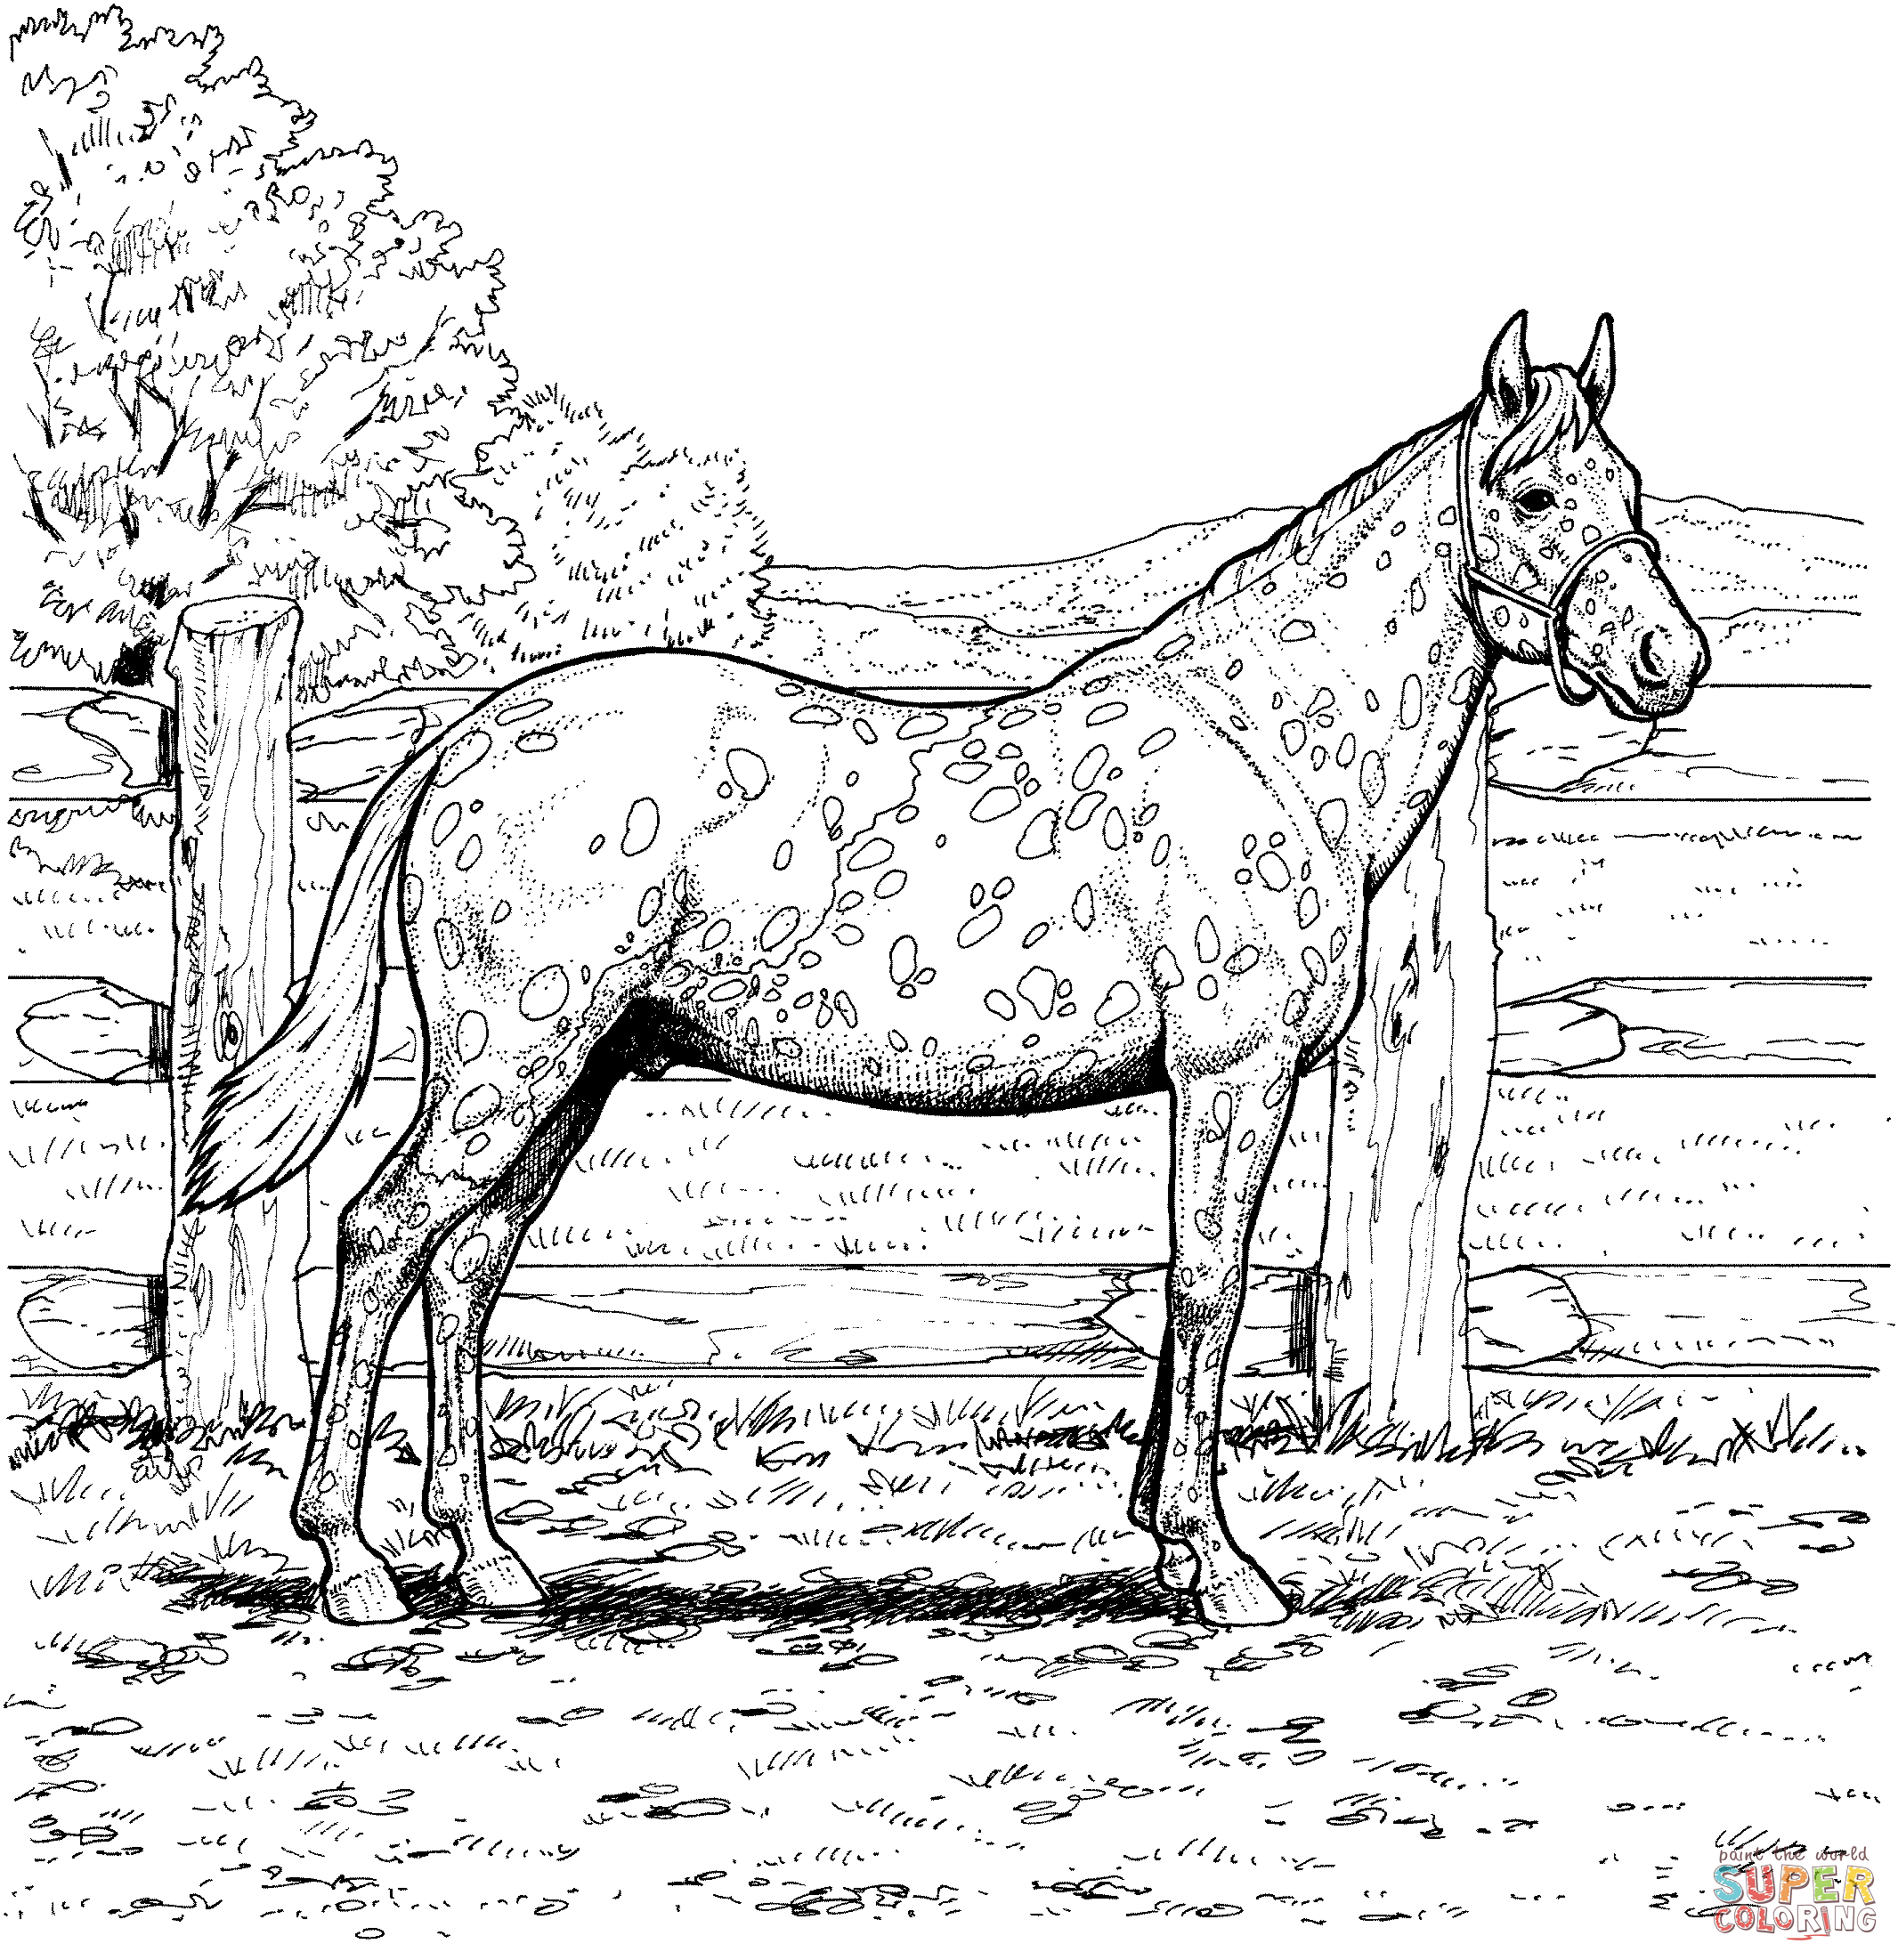 Horses coloring pages | Free Coloring Pages